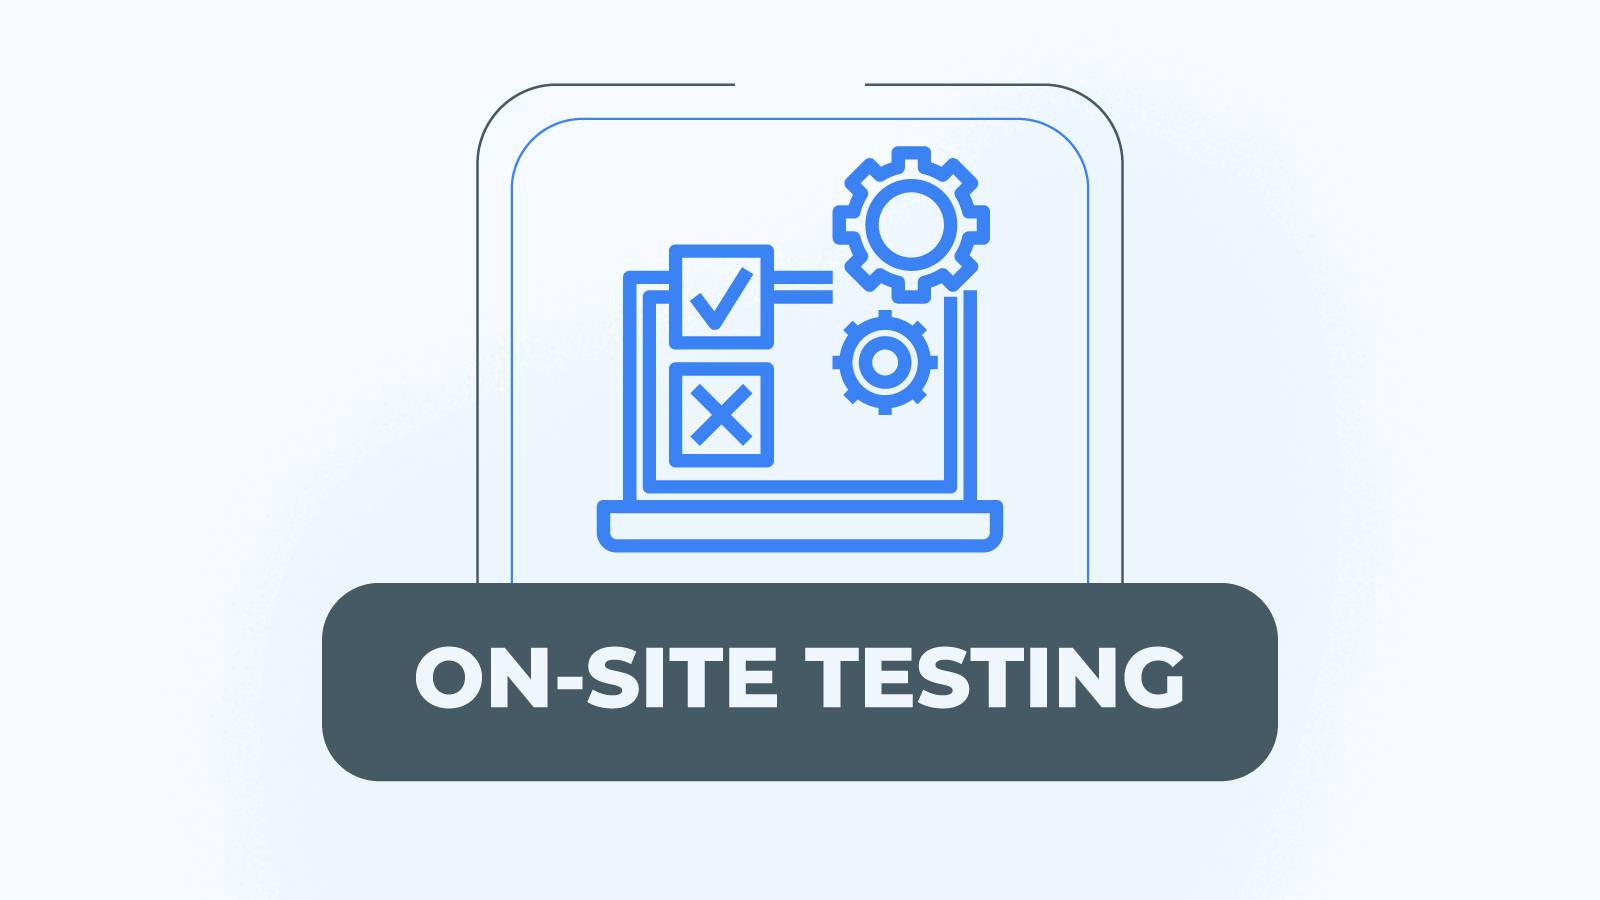 On-Site Testing